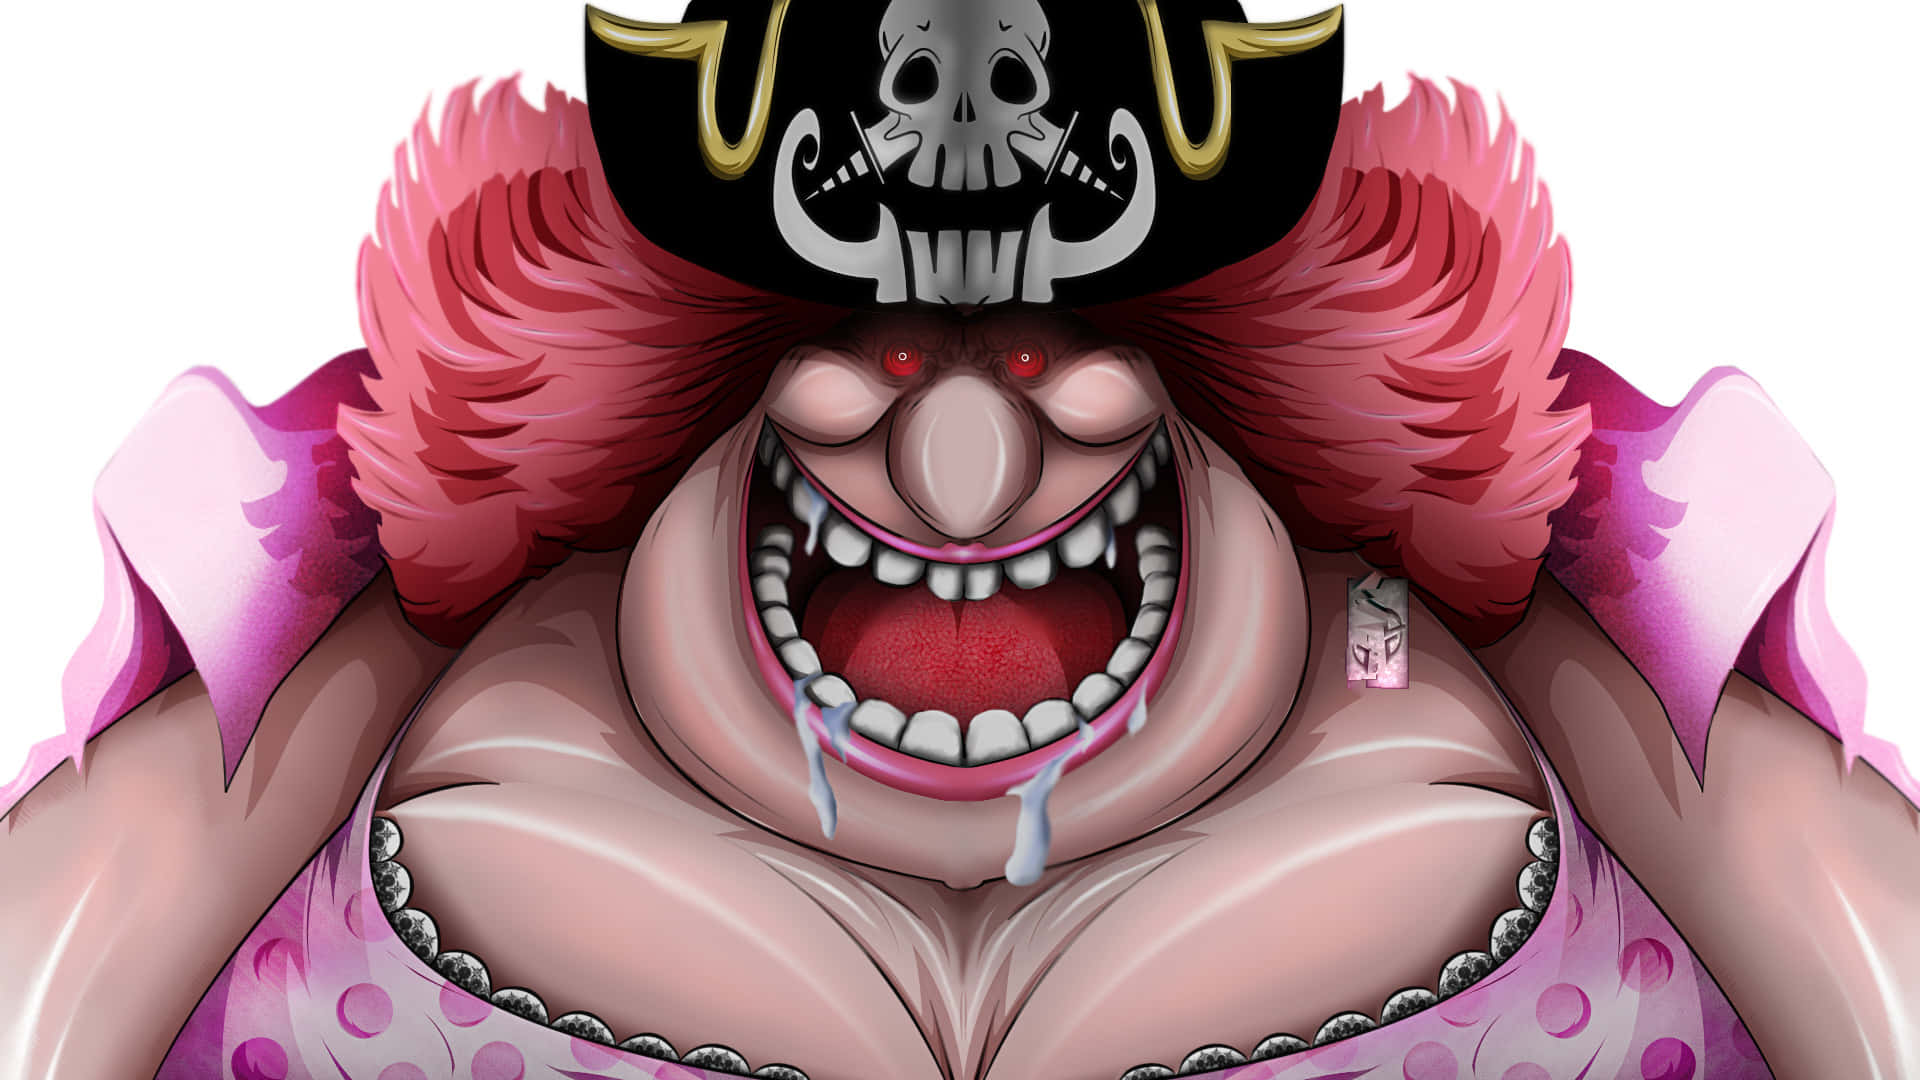 Charlotte Linlin, the fearsome pirate also known as Big Mom, stands tall and powerful in this stunning high-resolution wallpaper. Wallpaper